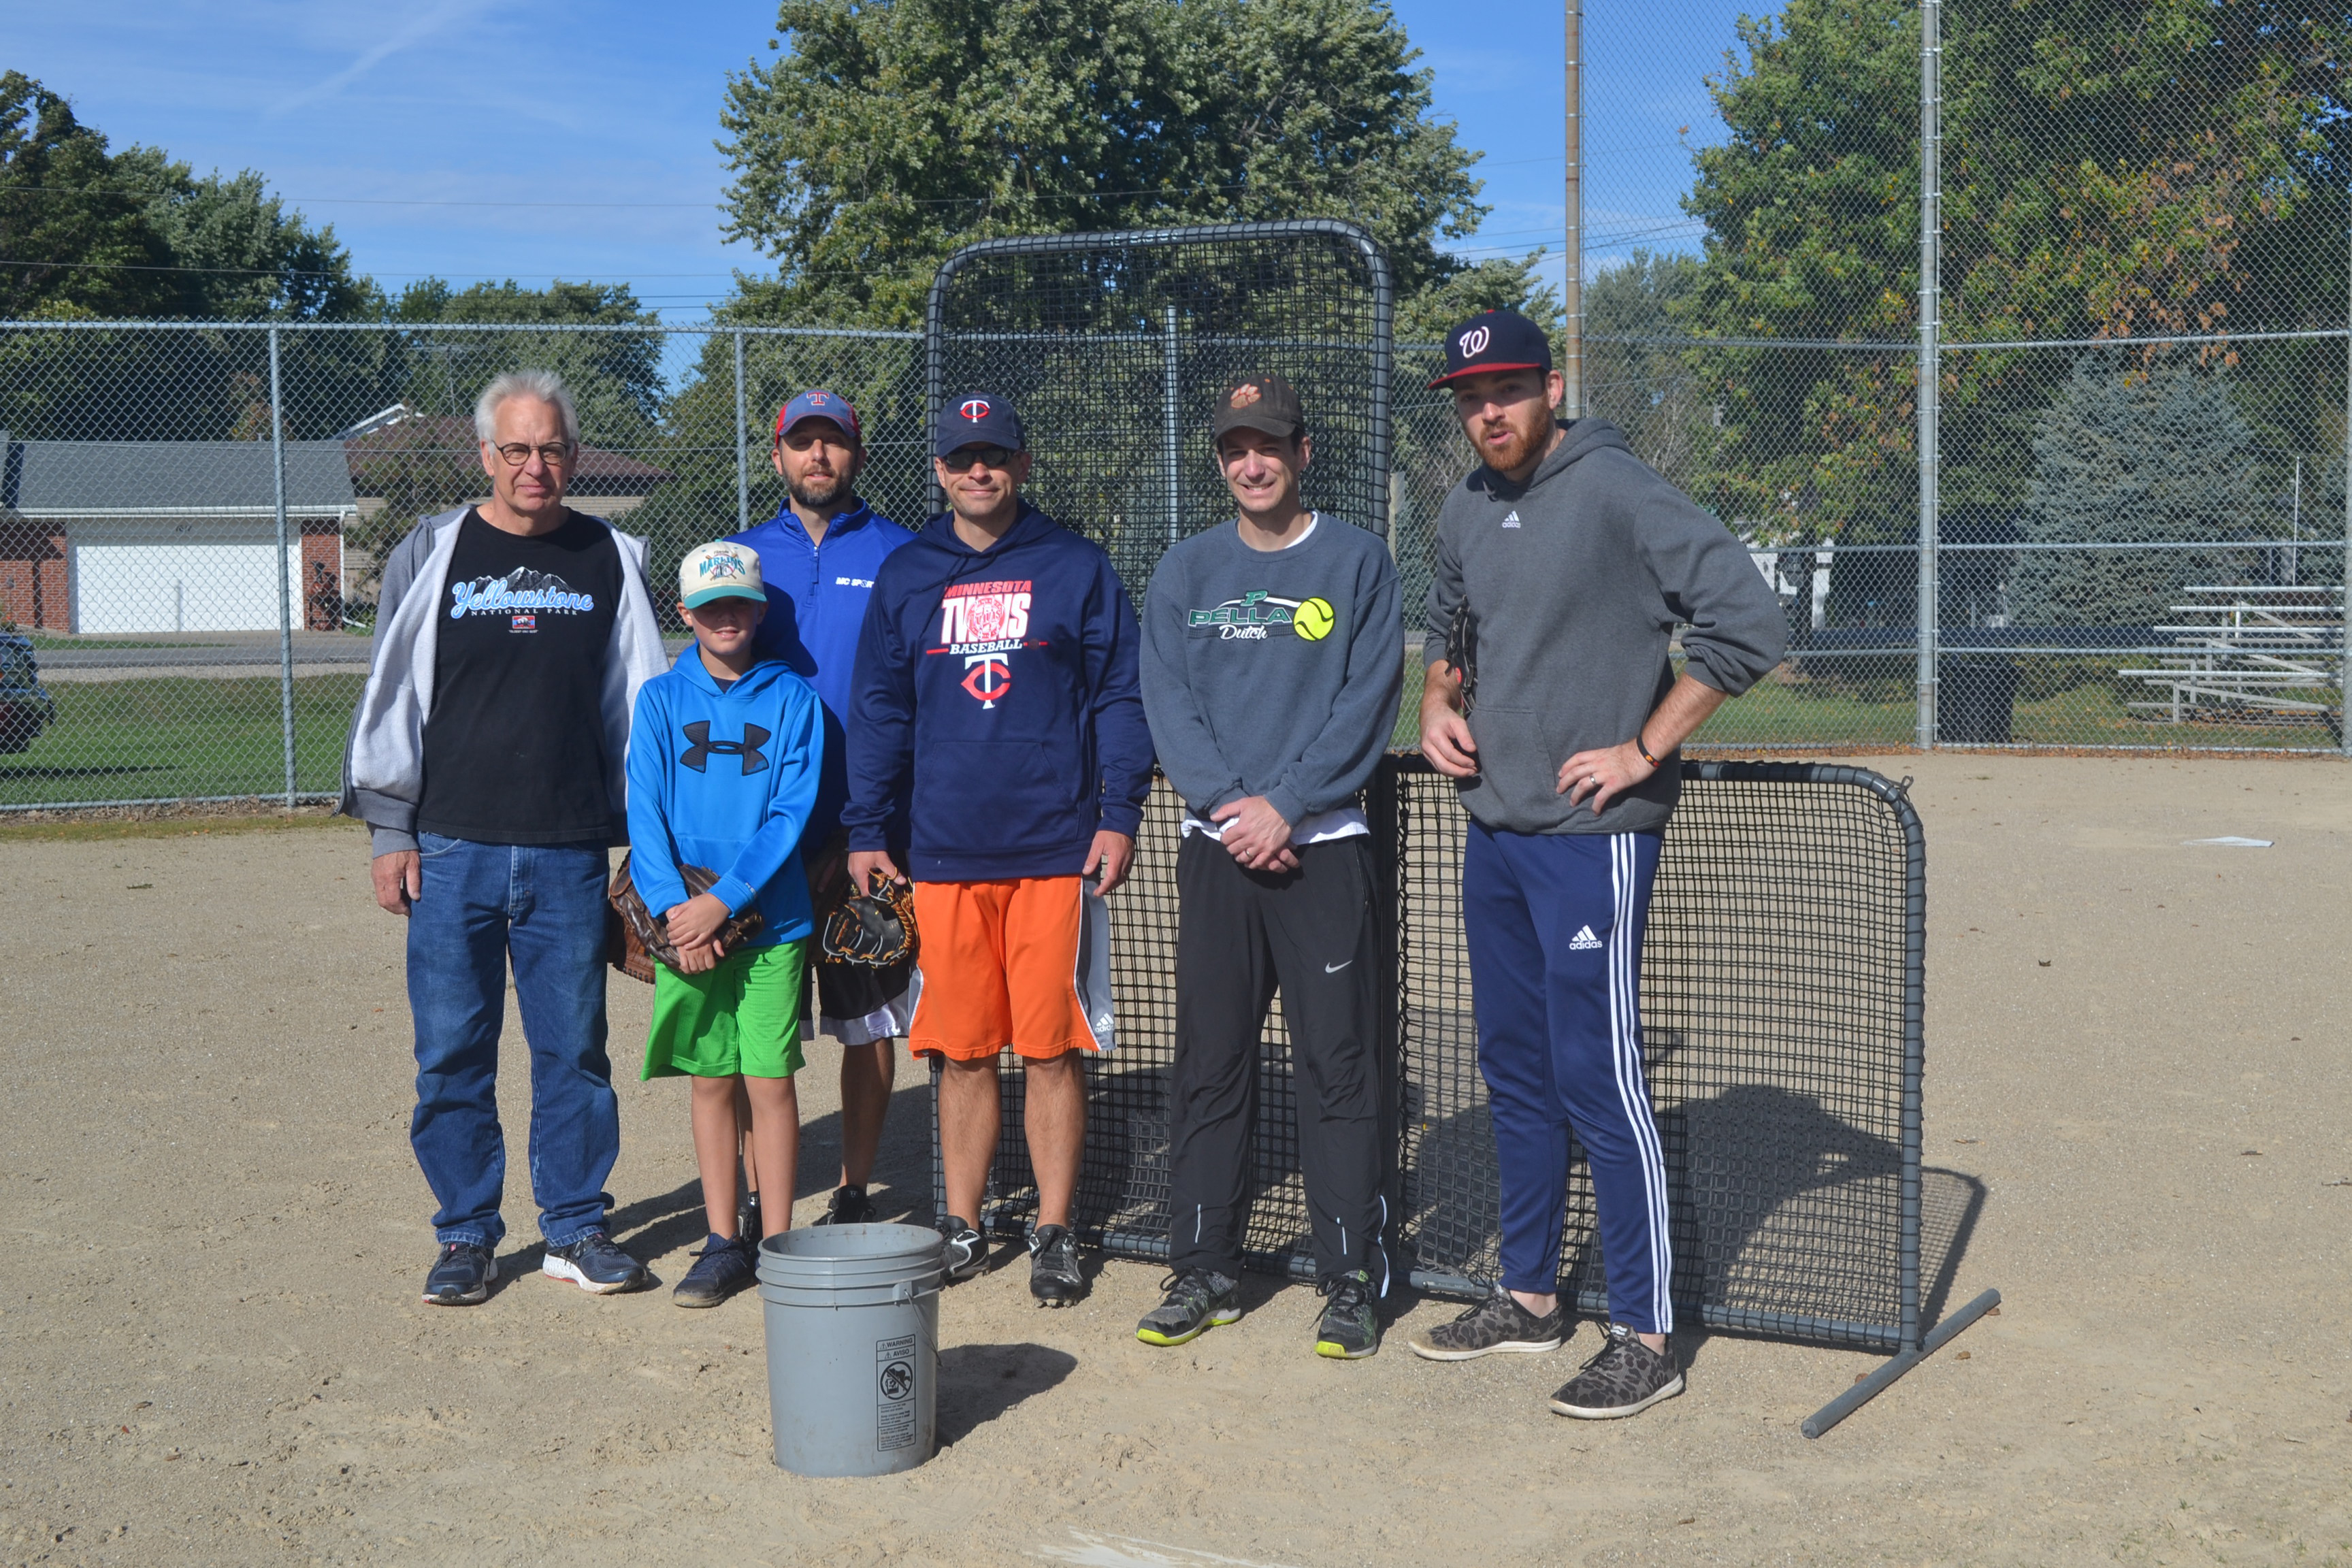 Getting the team back together: Coach David Brandt (far left) is joined (from left to right) by Andrew Carr, Dan Carr, the Brandt brothers Josiah and Nathanael, and Willie Stewart. Photo courtesy of Bridget Brandt